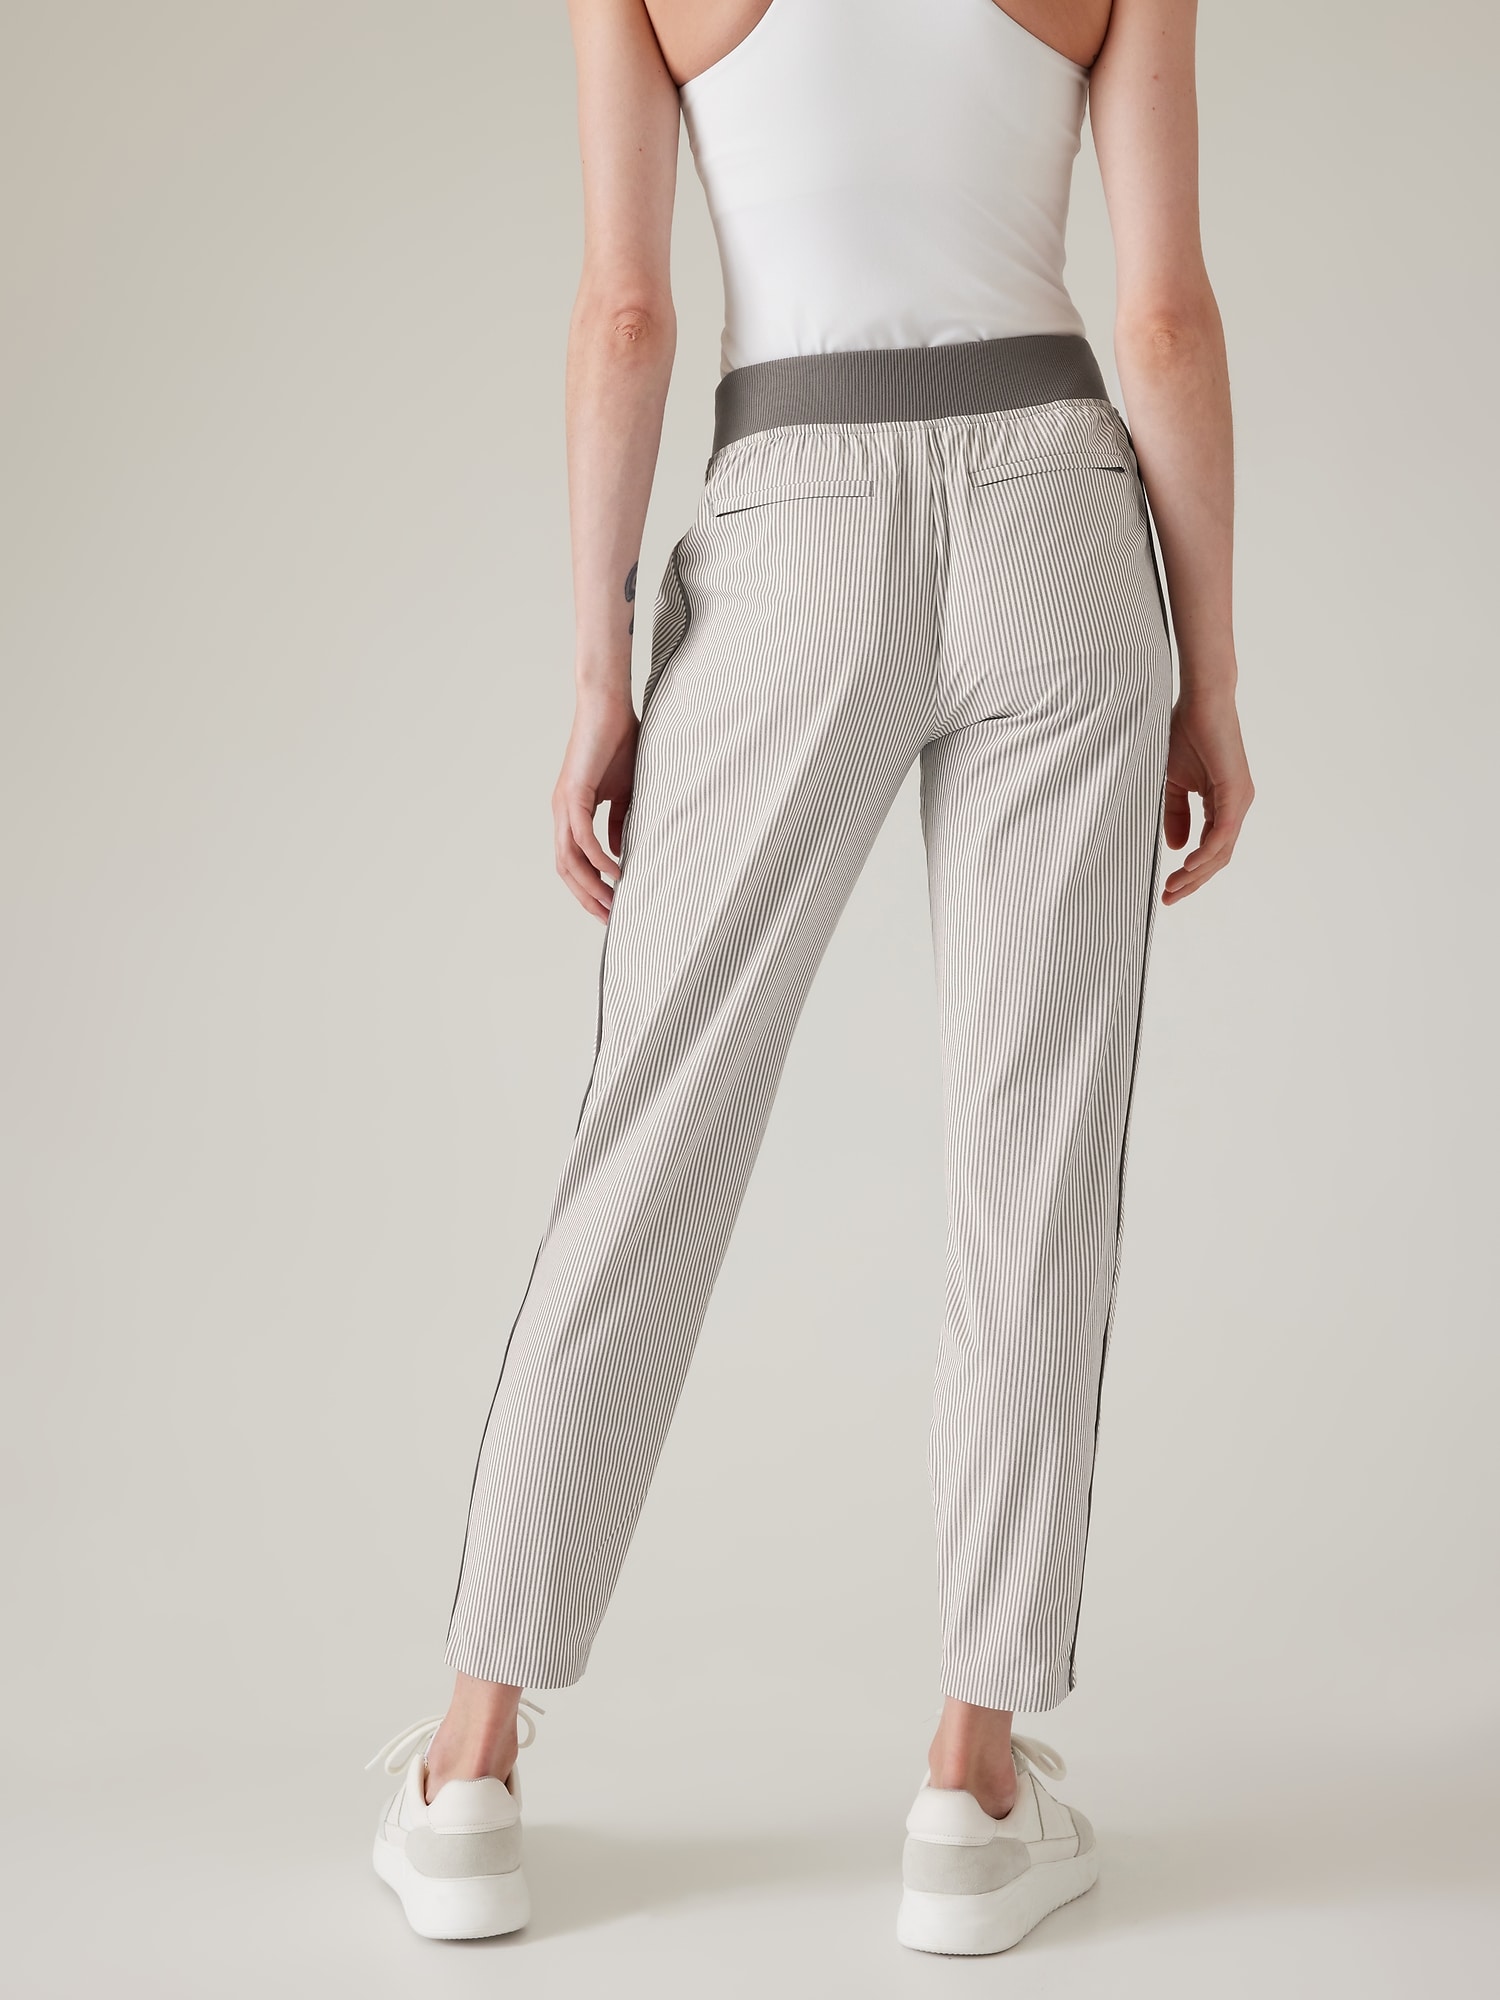 Brooklyn Ankle Pant, textile, Introducing the new Brooklyn Ankle Pant:  Recycled fabric that's lightweight, wrinkle resistant, easy to move in, and  UPF 50+. Shop now: gap.us/2nyLmCk